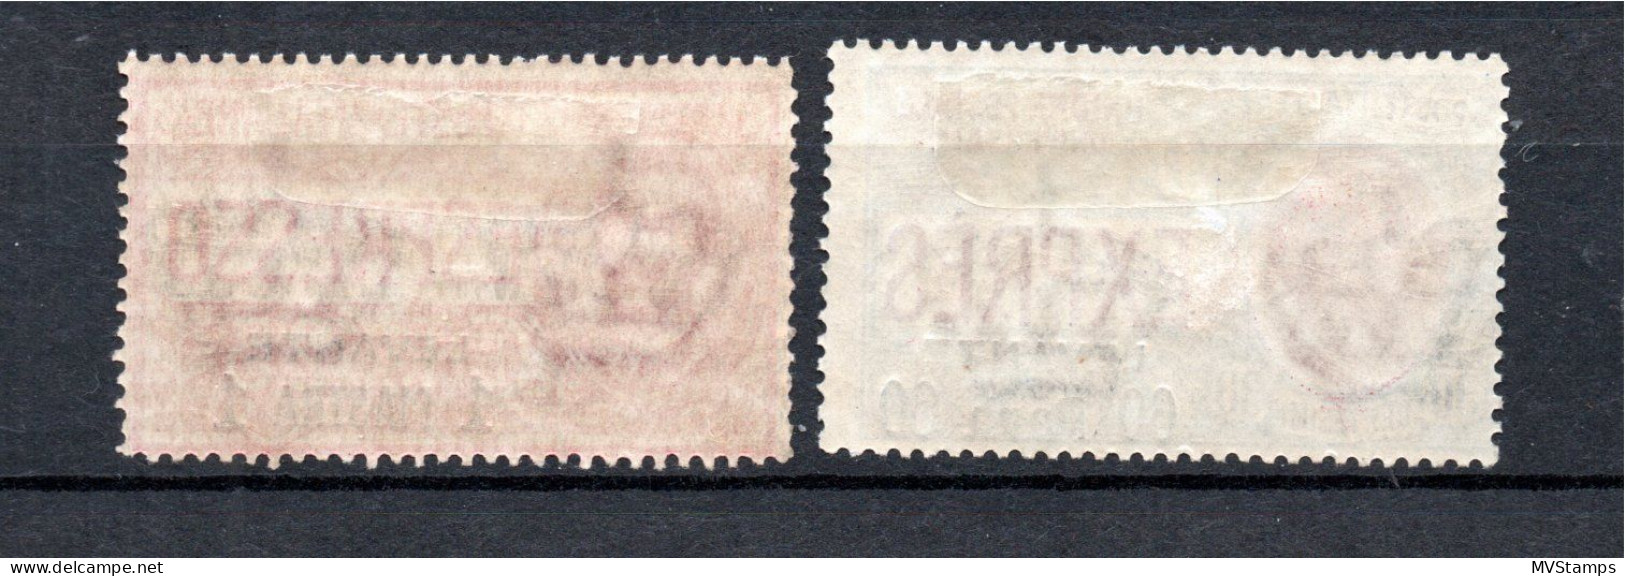 Italian Levant 1908 Old Set Overpinted Espresso Stamps (Michel II) MLH - Emissions Générales